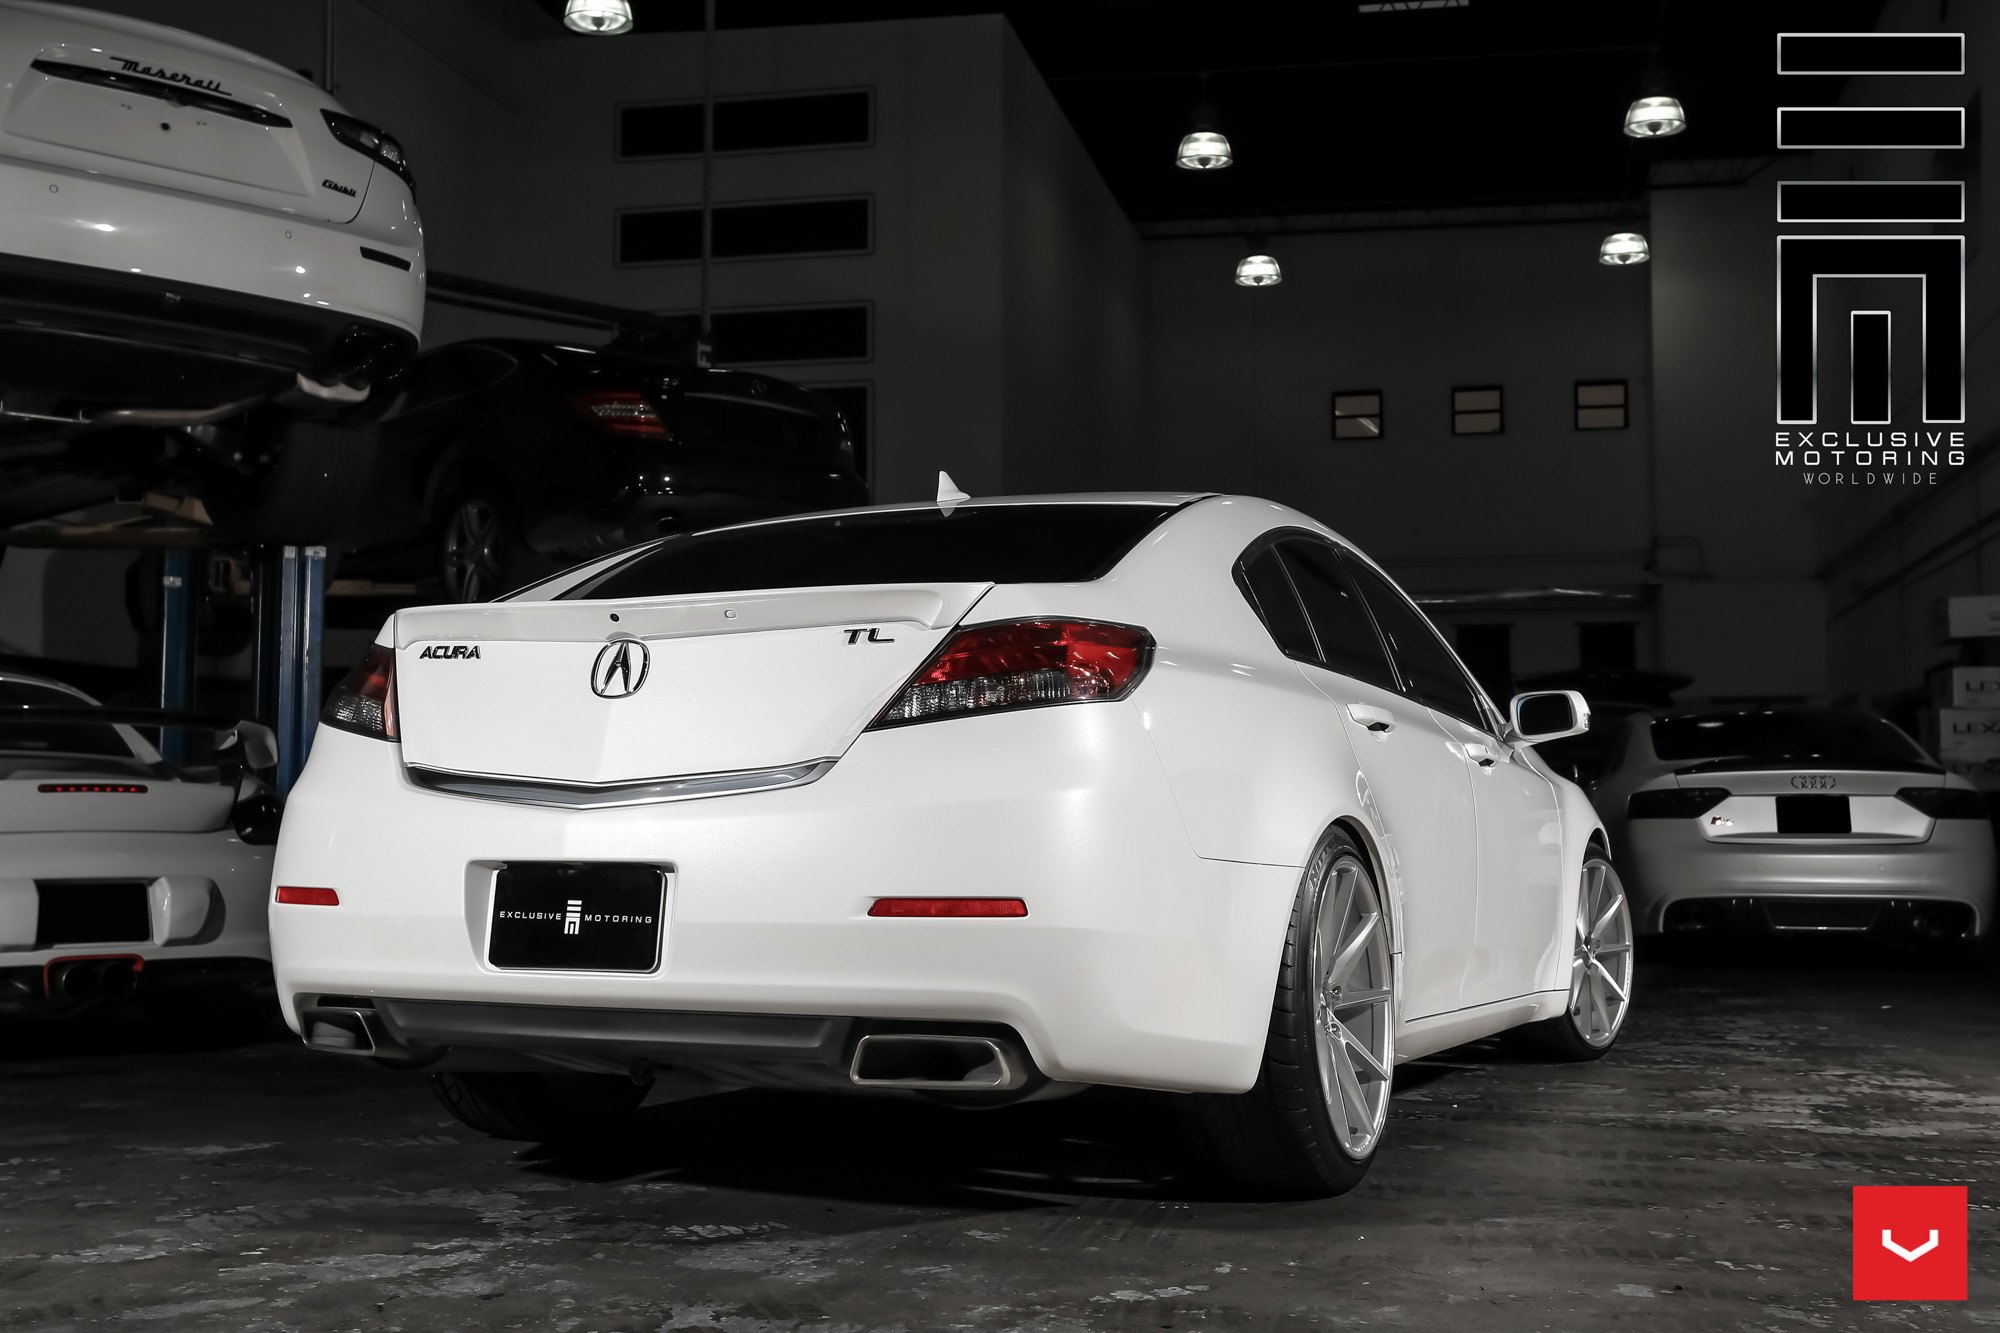 Duck Tail Spoiler on Acura TL - Photo by Vossen